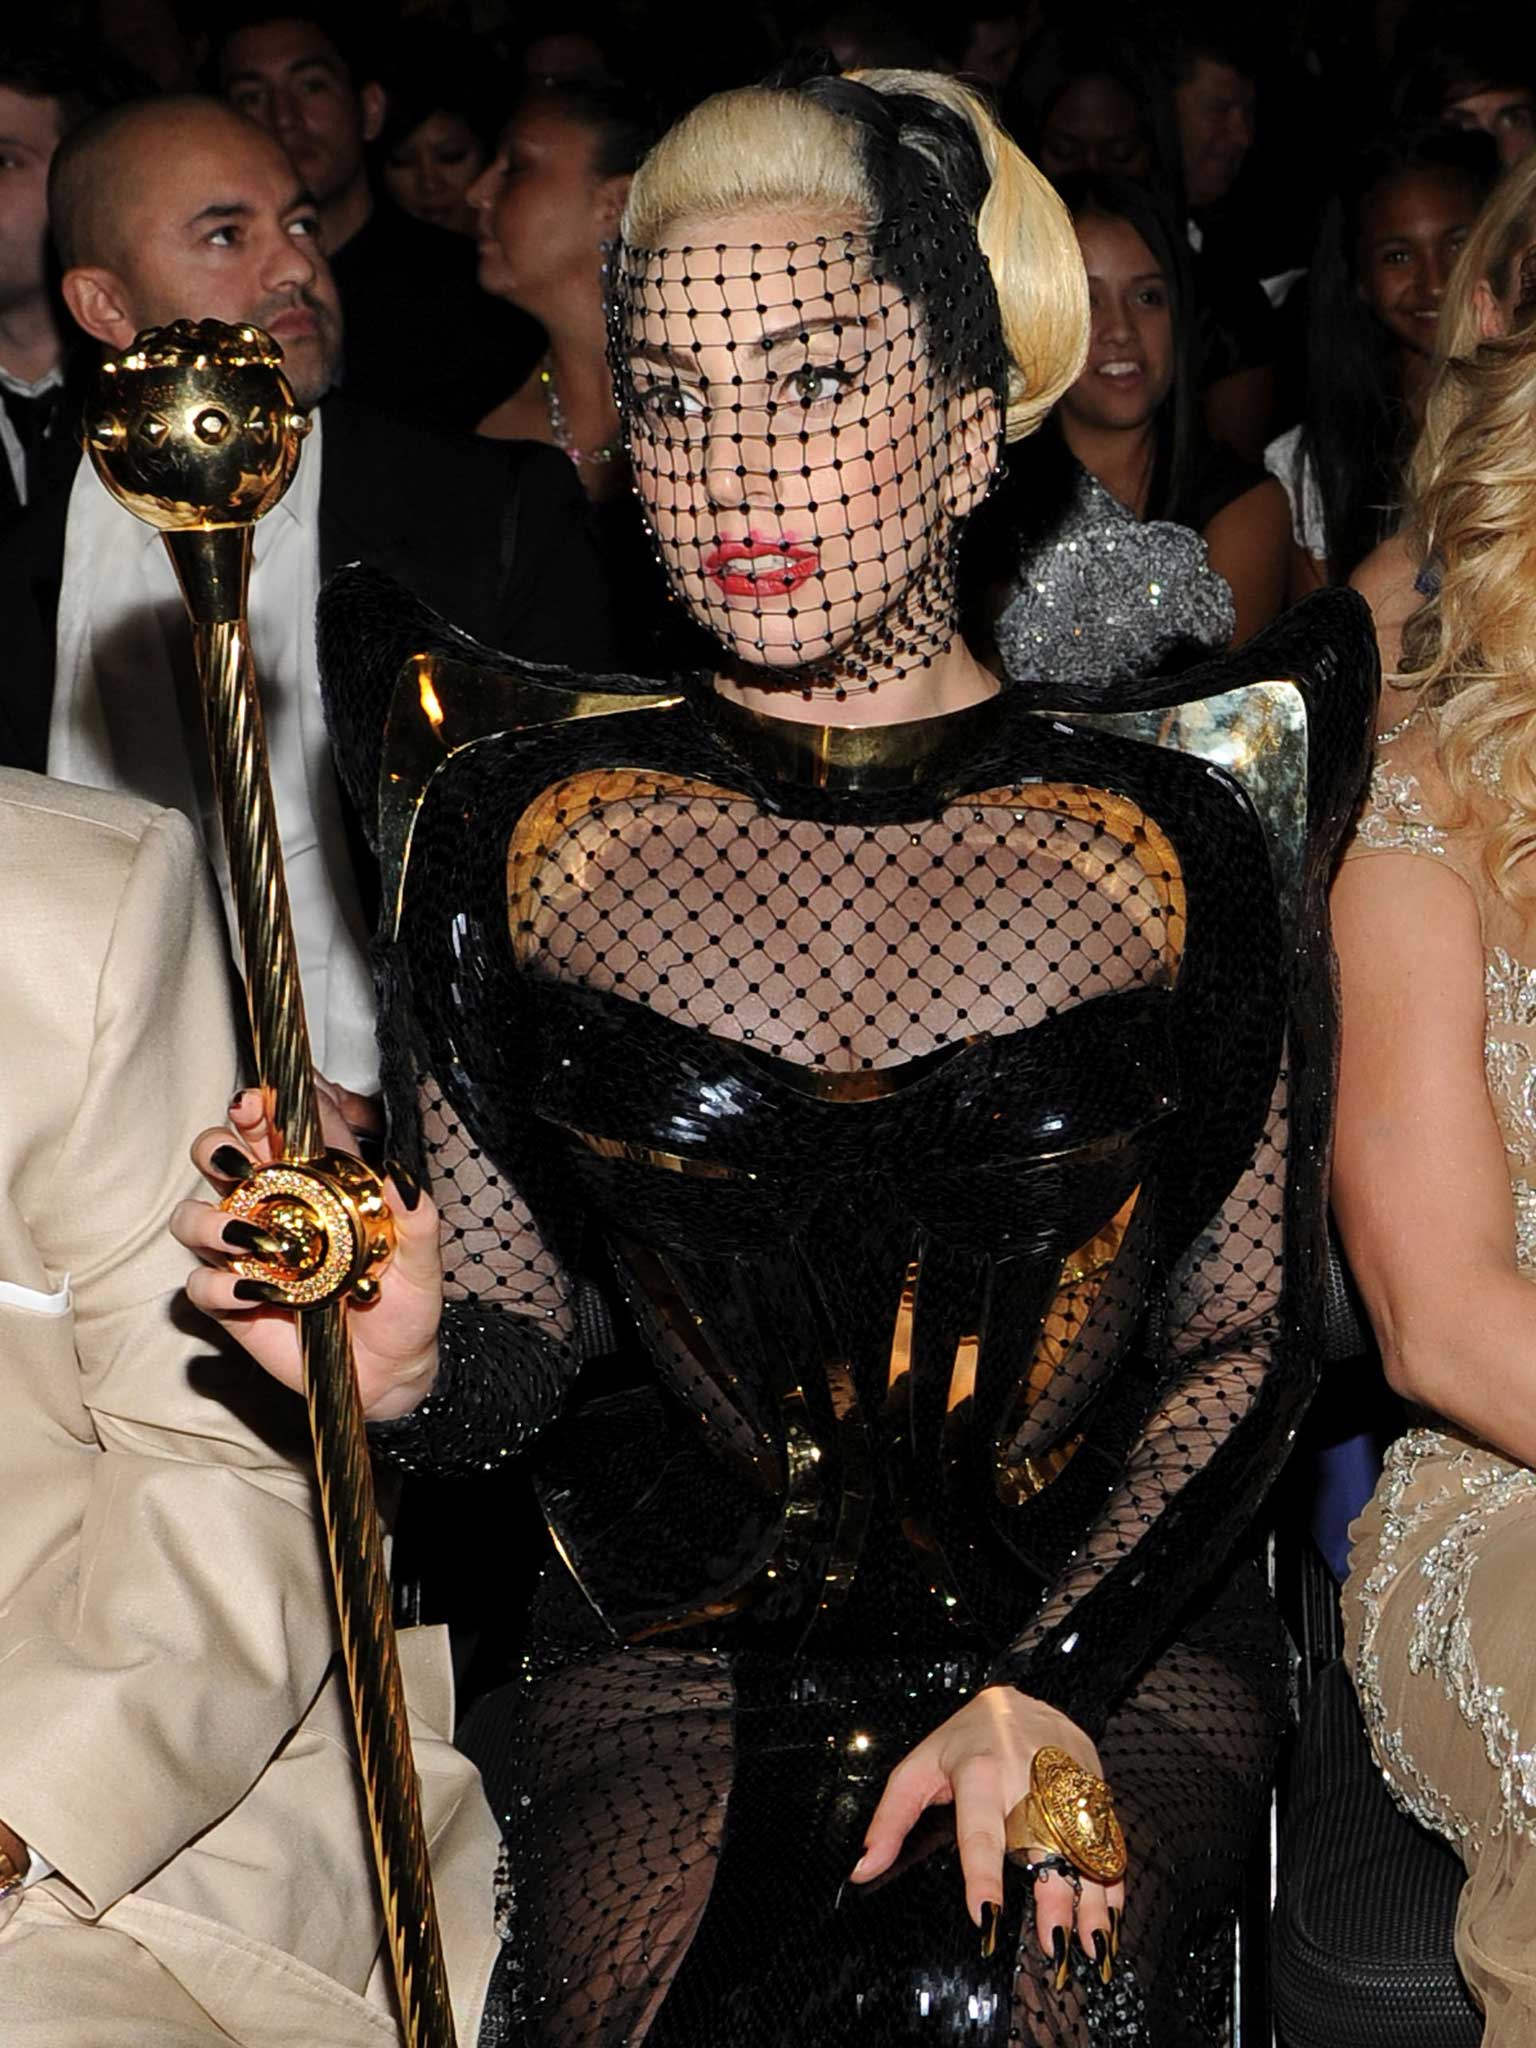 Singer Lady Gaga in Versace at last year's Grammy awards